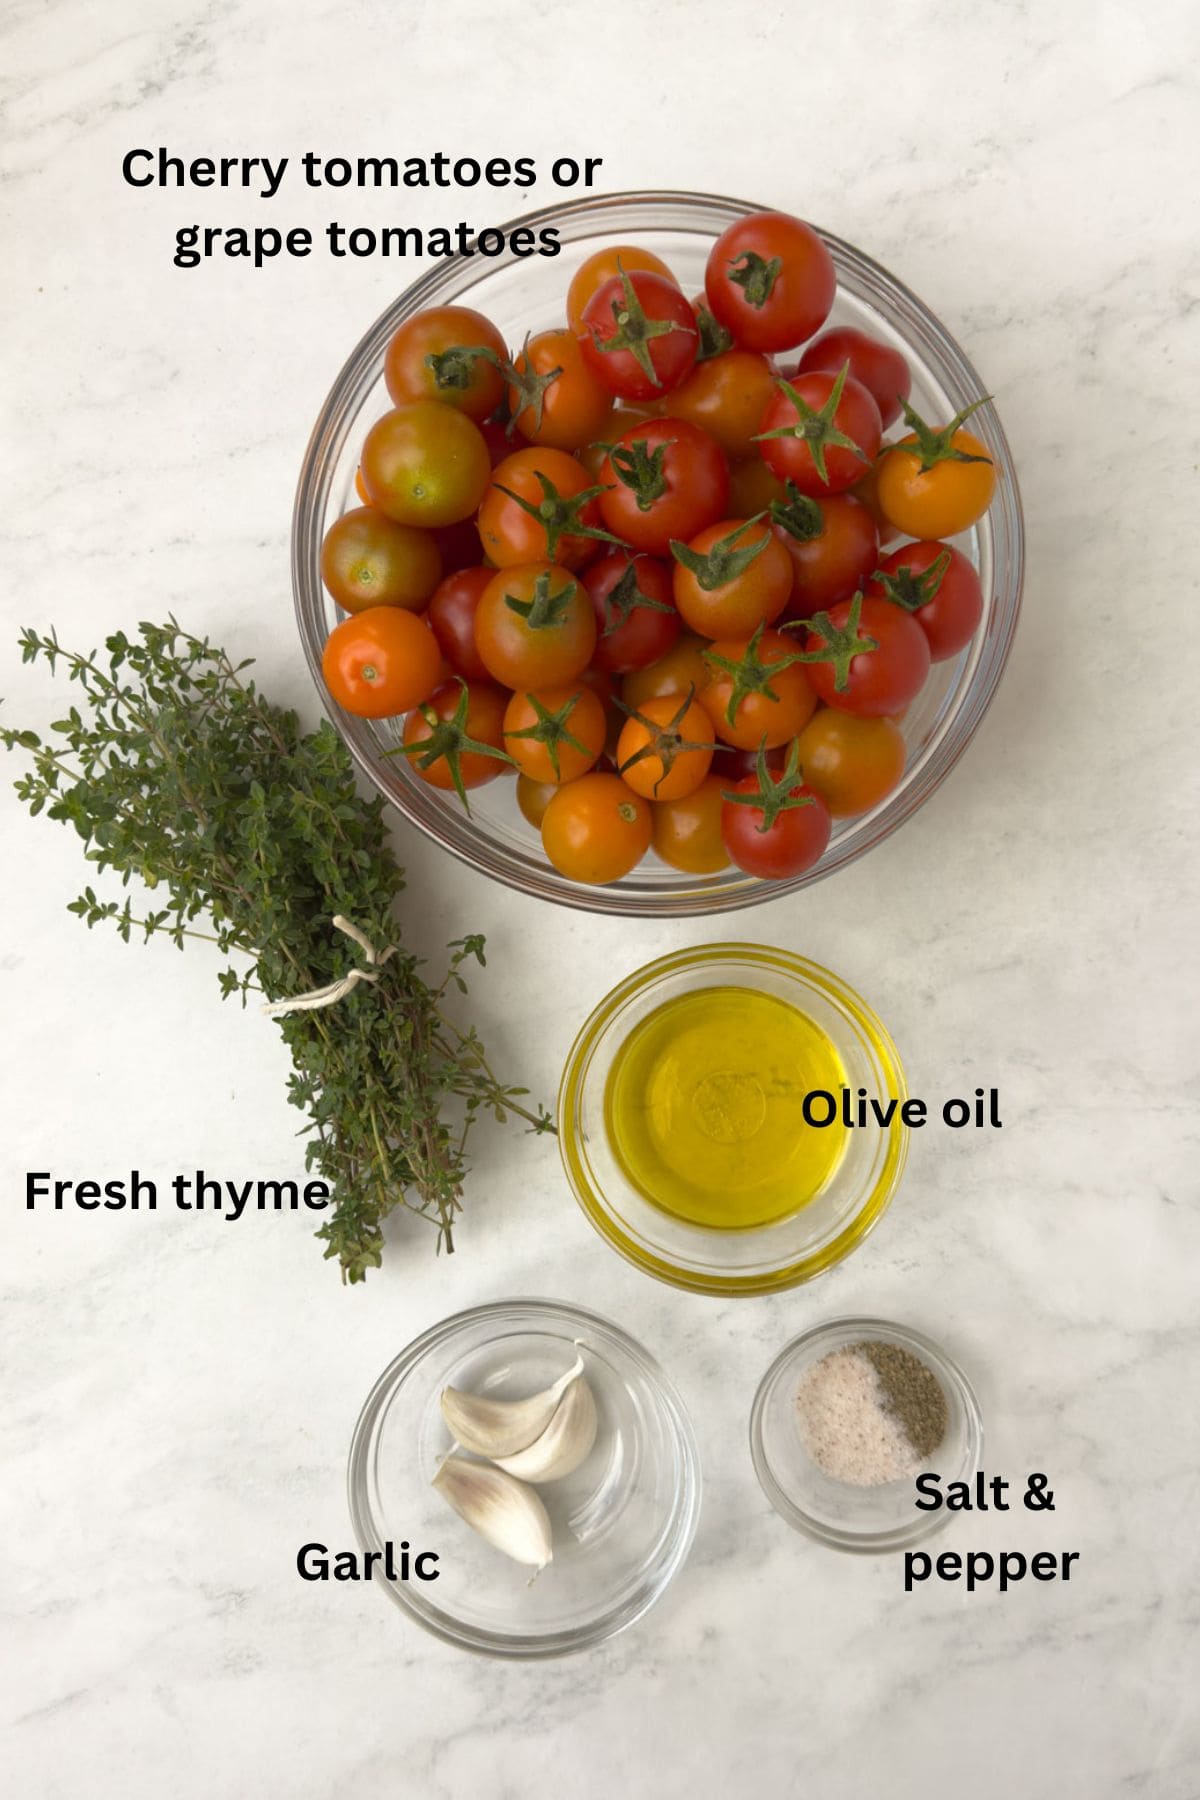 Ingredients for roasted cherry tomatoes on the counter in glass bowls.